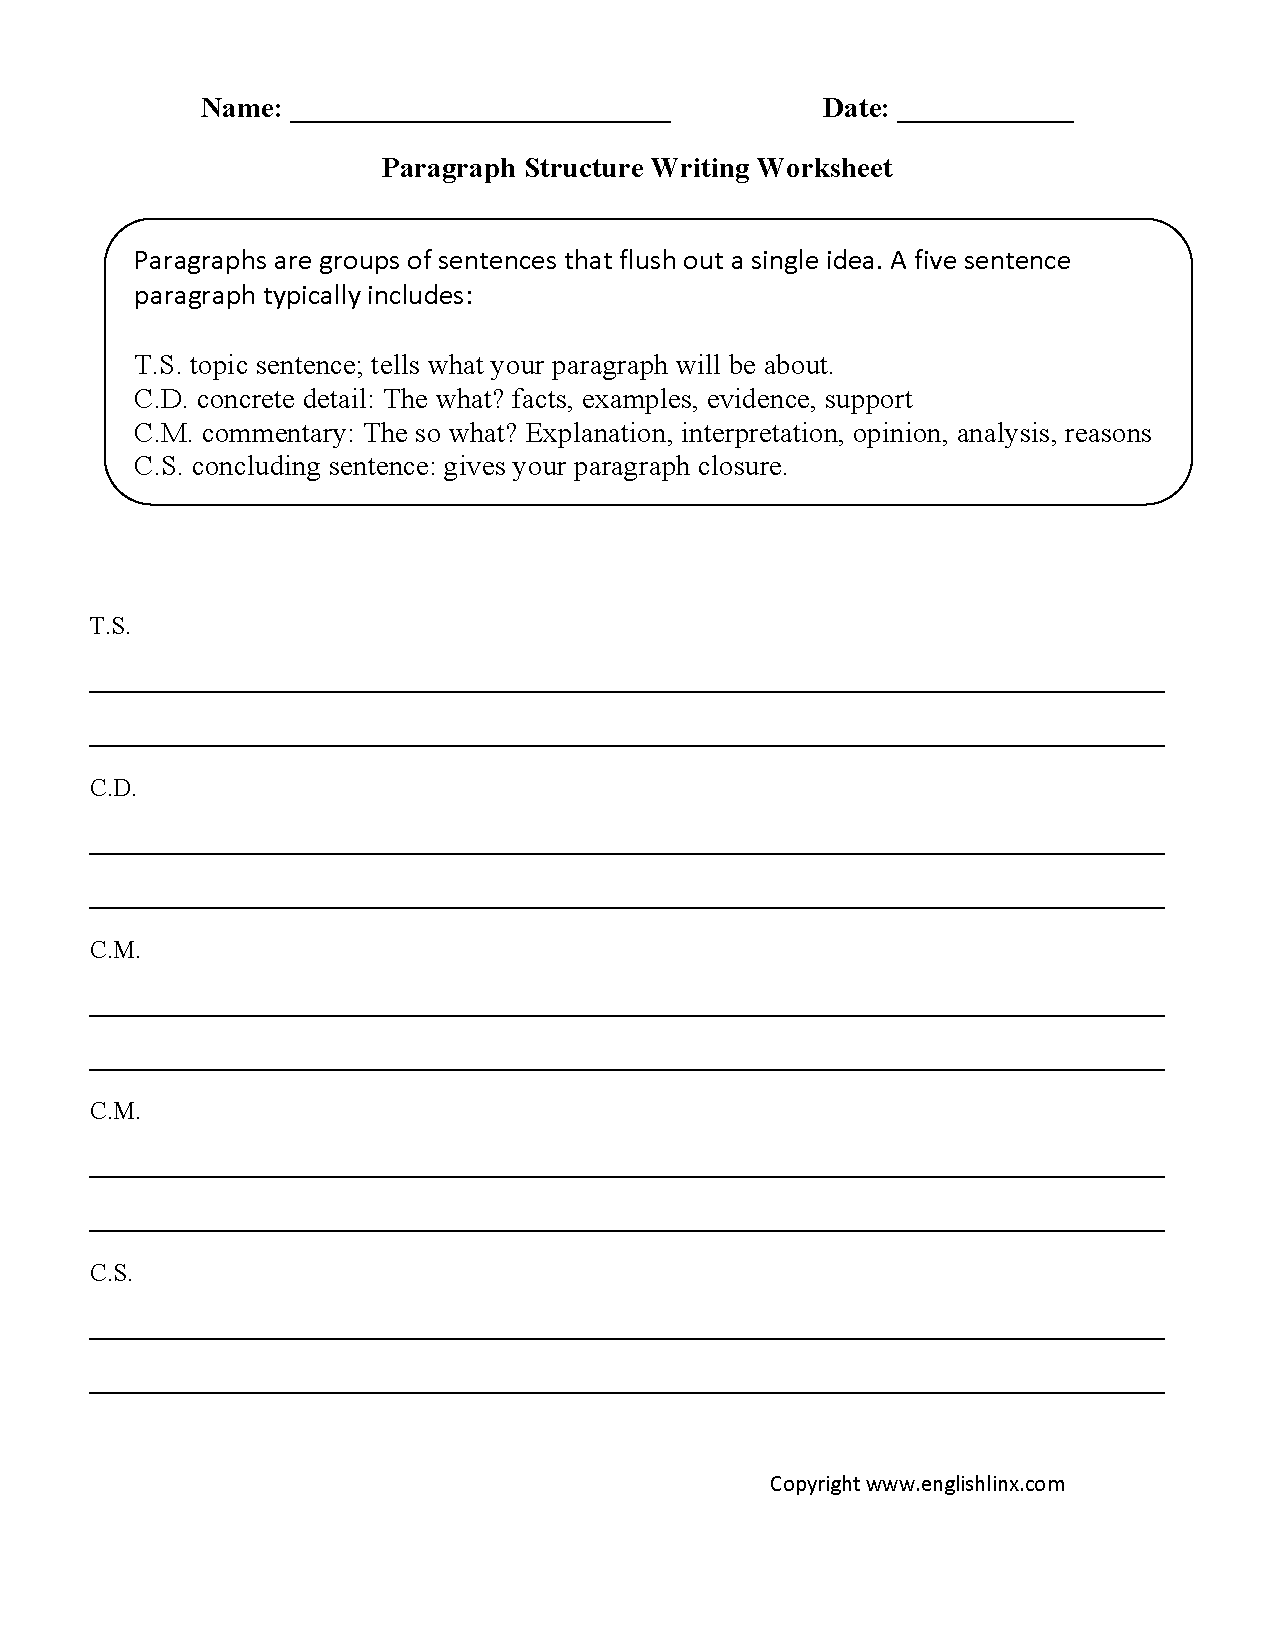 16-best-images-of-free-paragraph-writing-worksheets-creative-writing-worksheets-paragraph